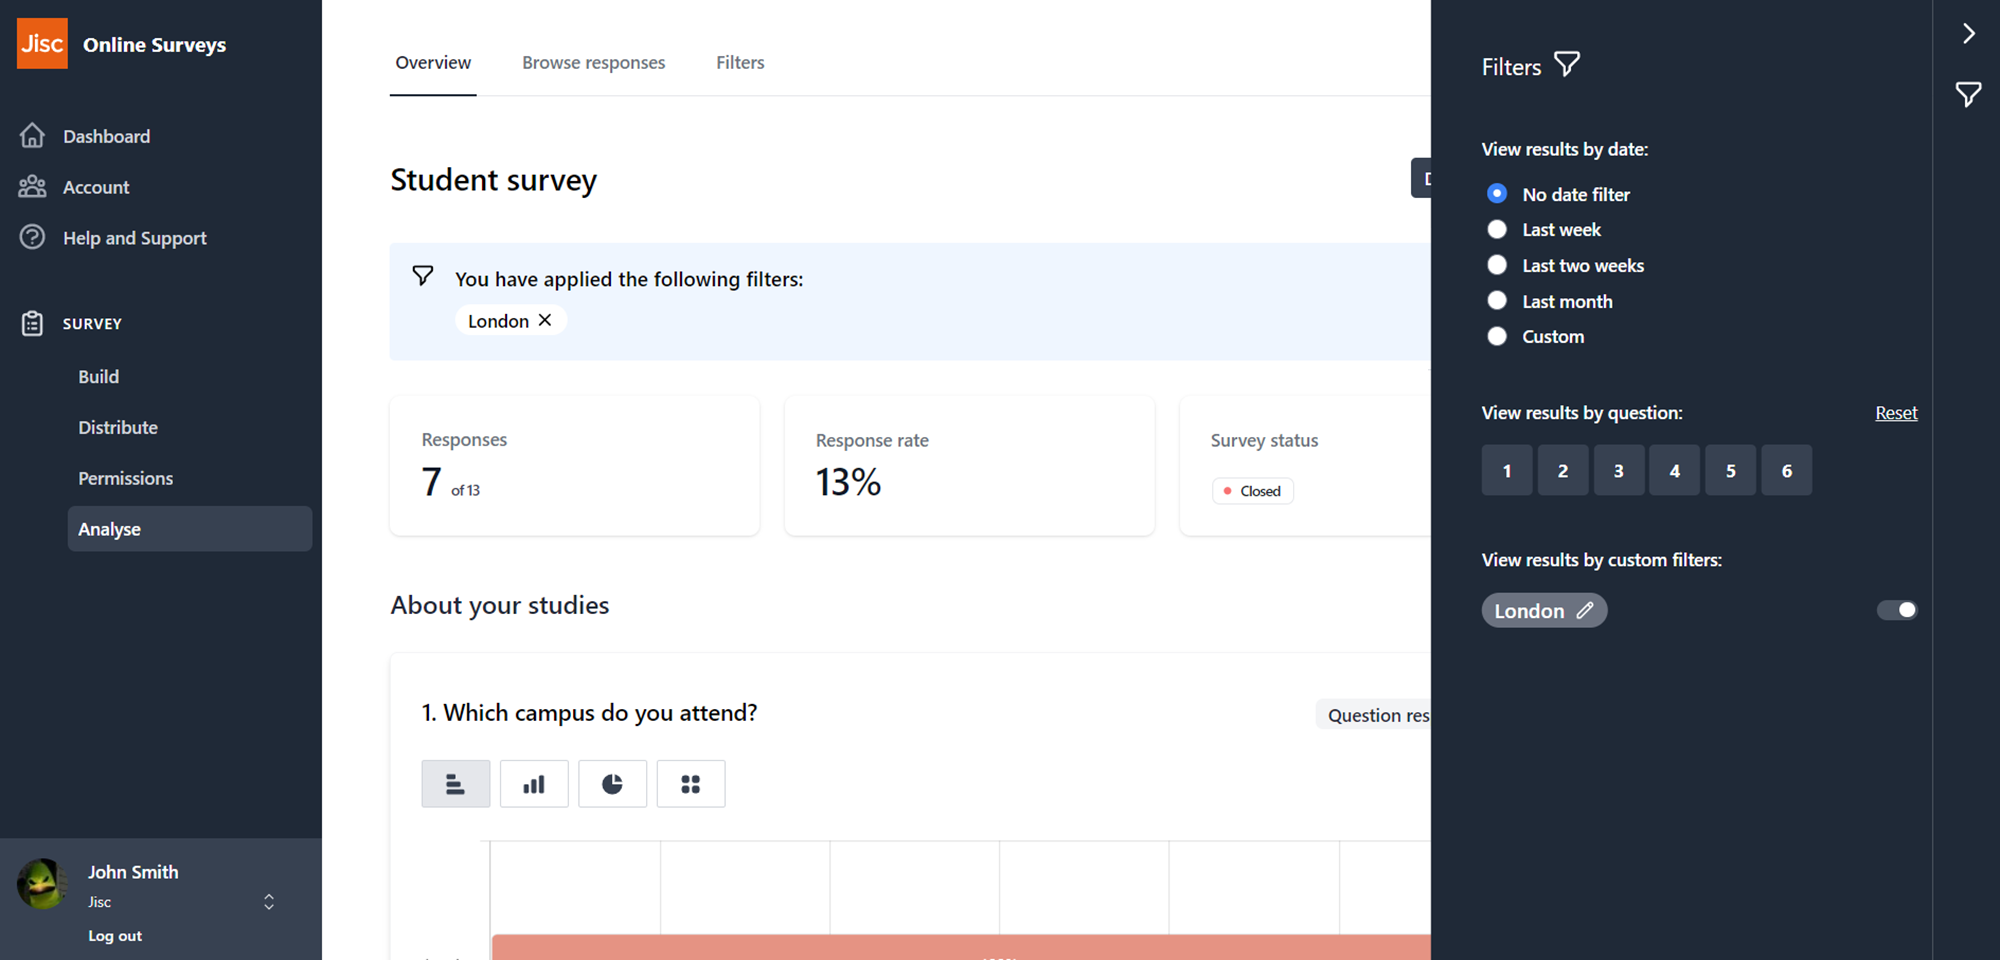 An example of a survey overview page with a custom filter applied.